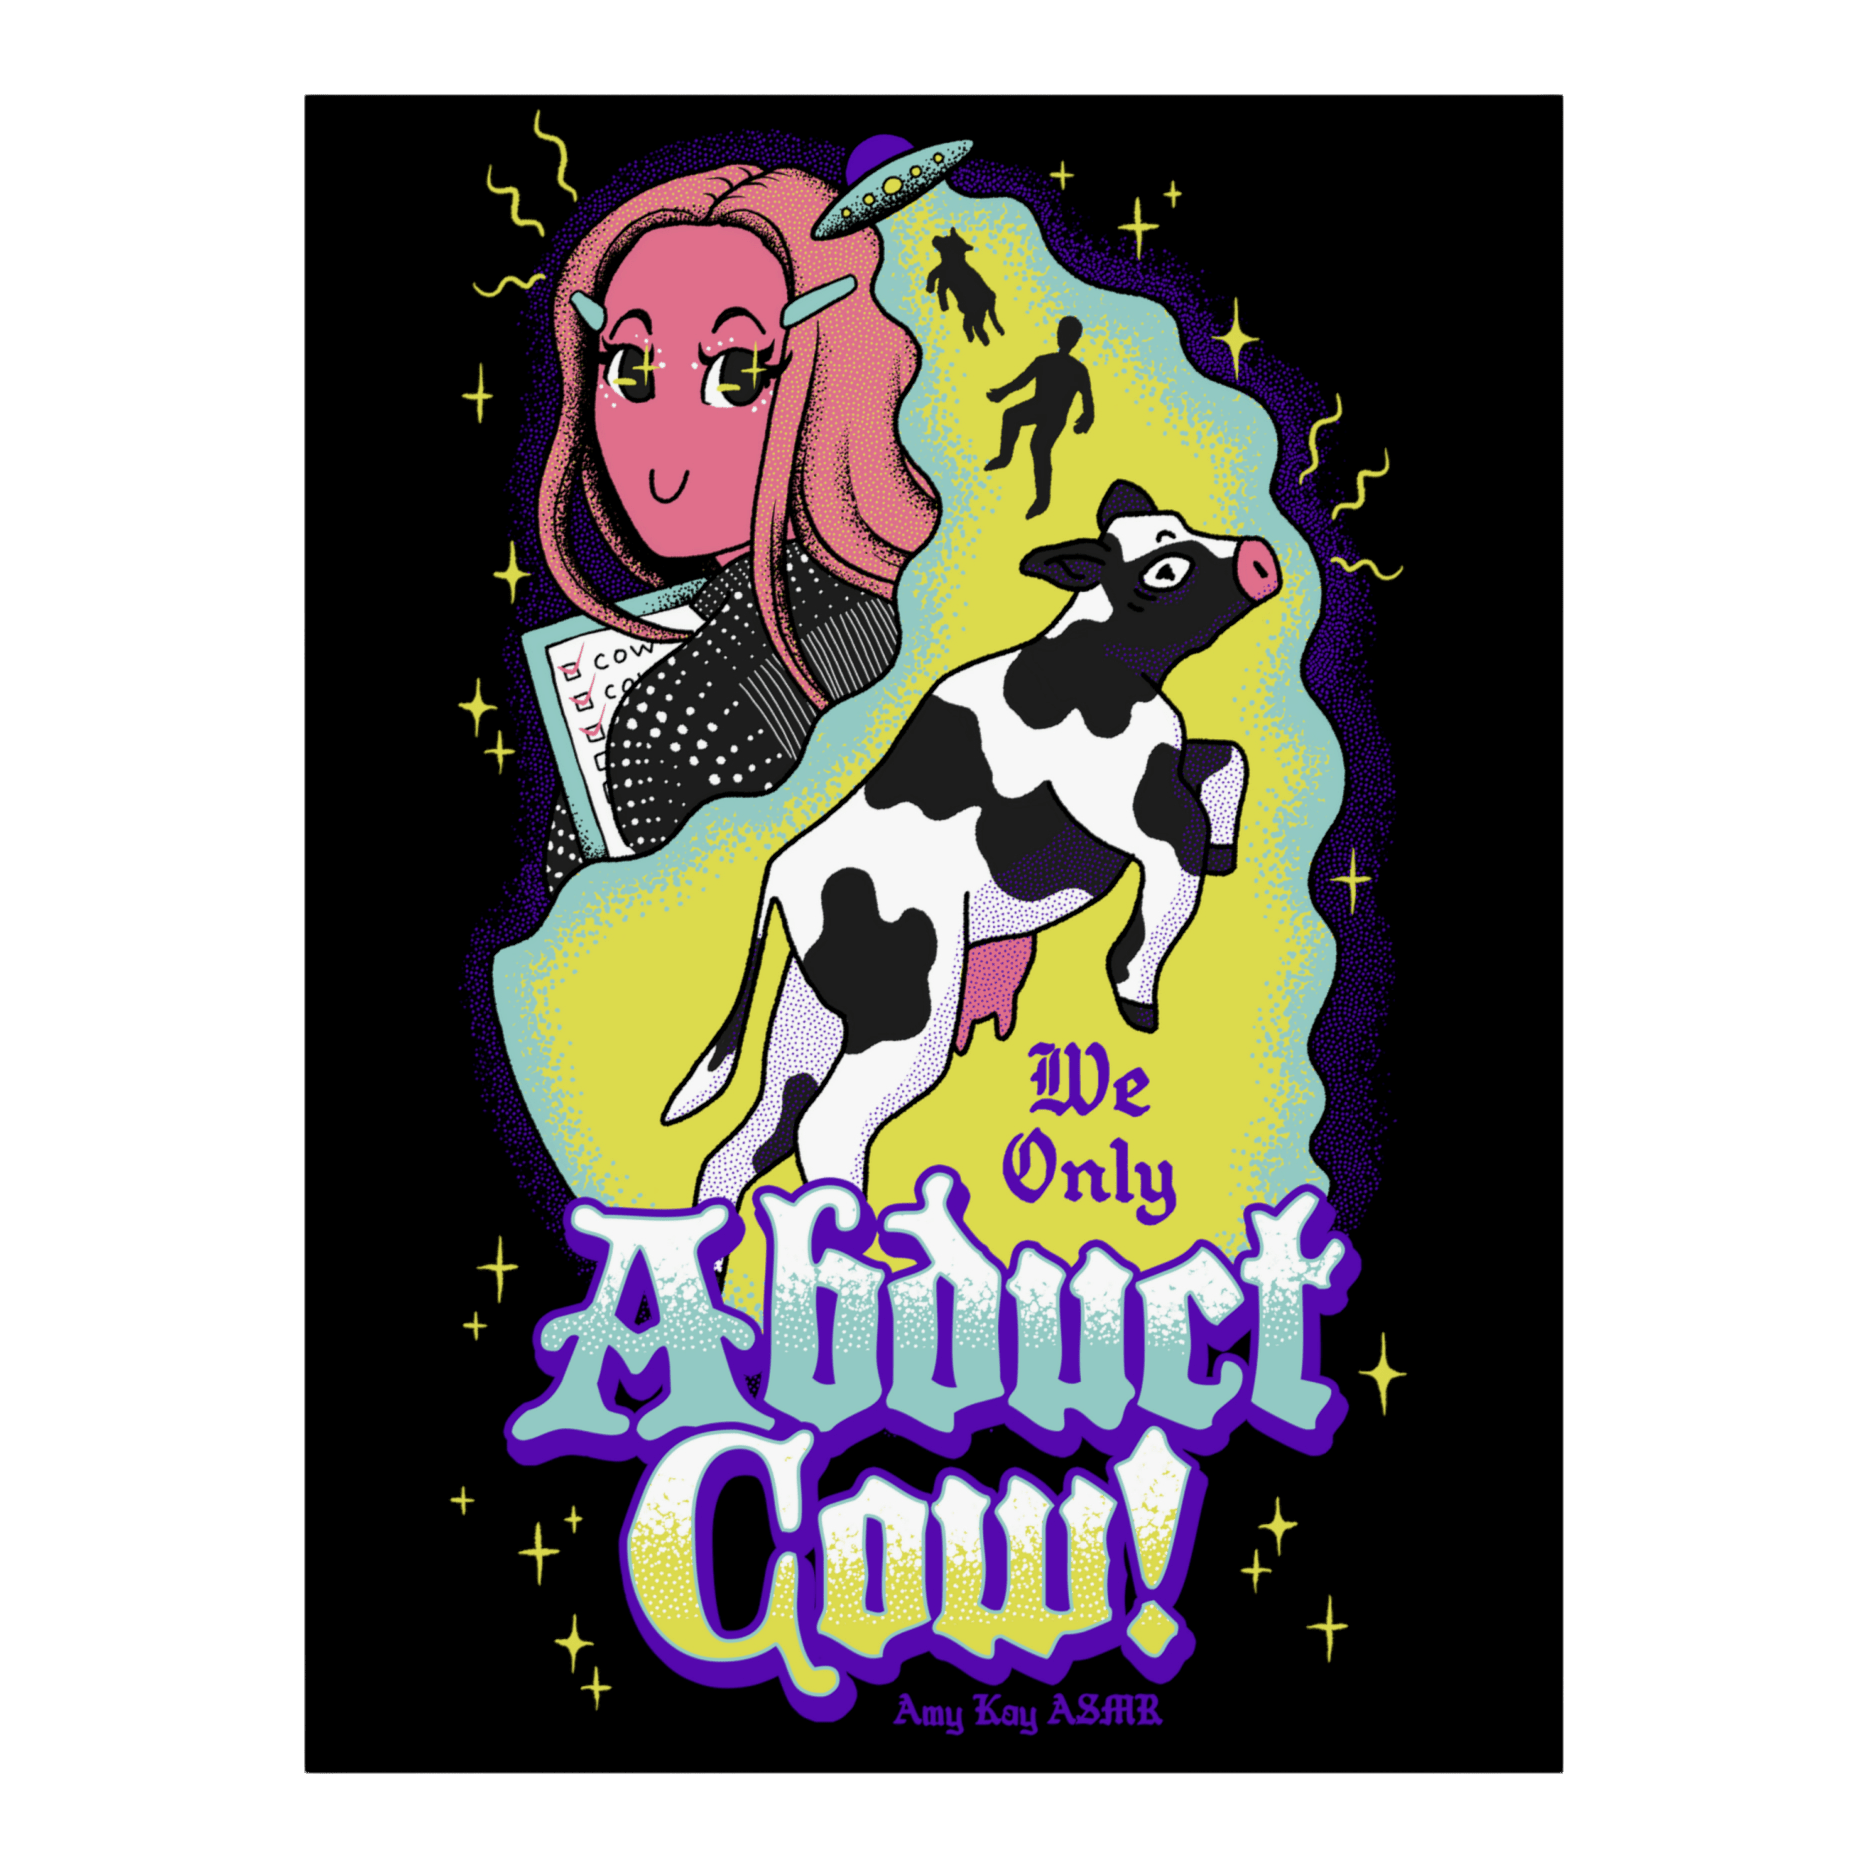 We Only Abduct Cow Poster - Amy Kay ASMR